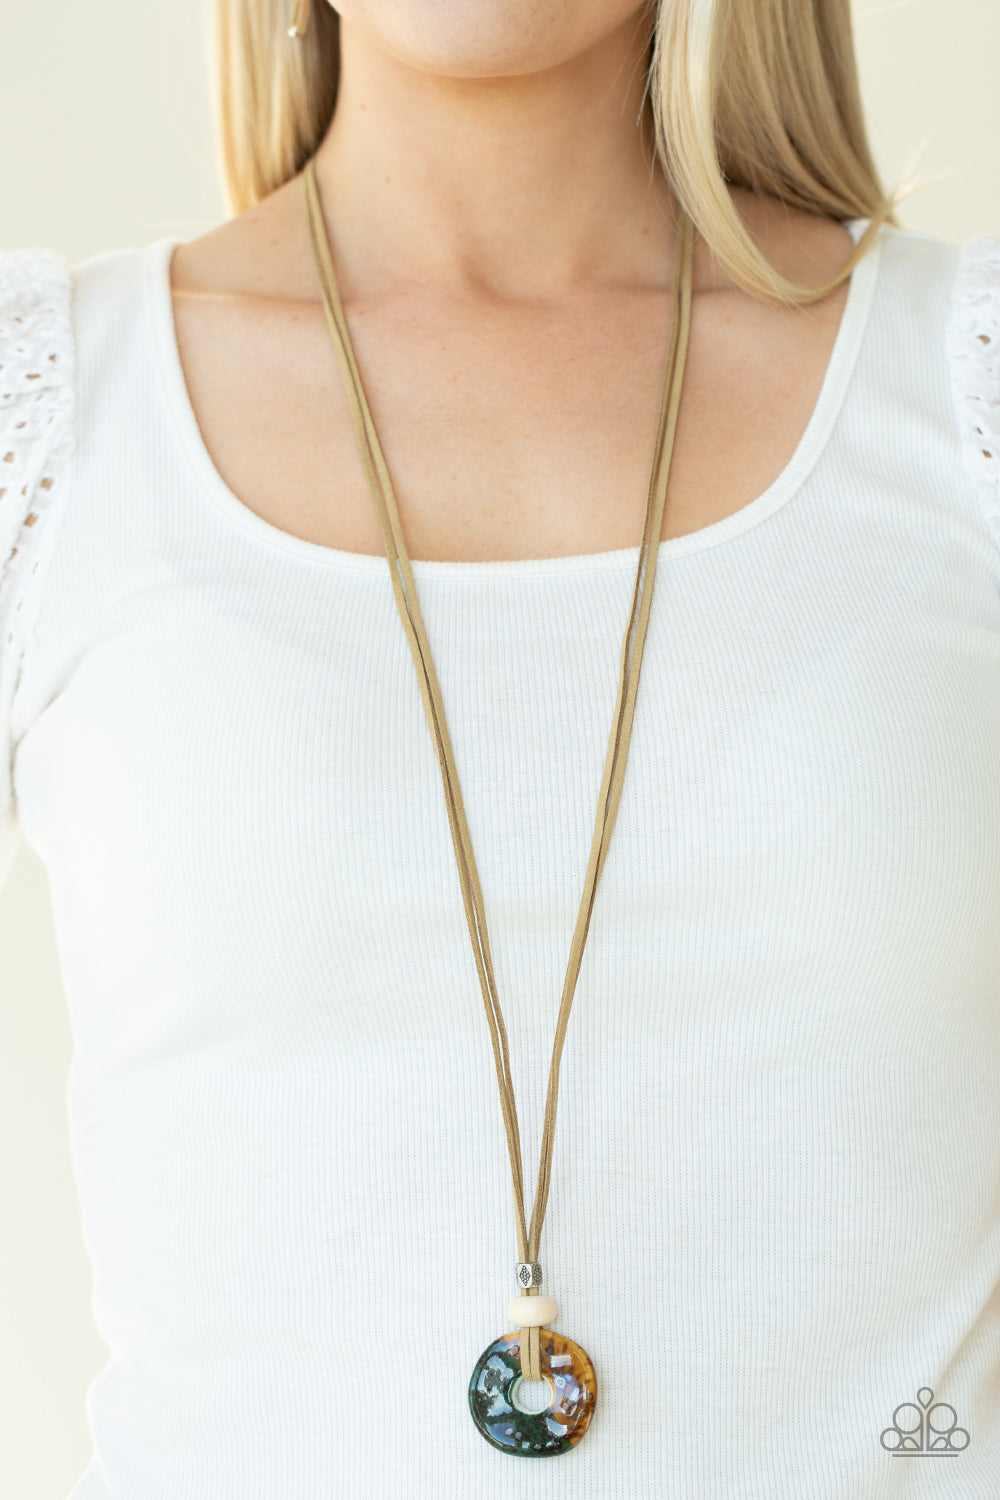 Primal Paradise Necklace - Brown